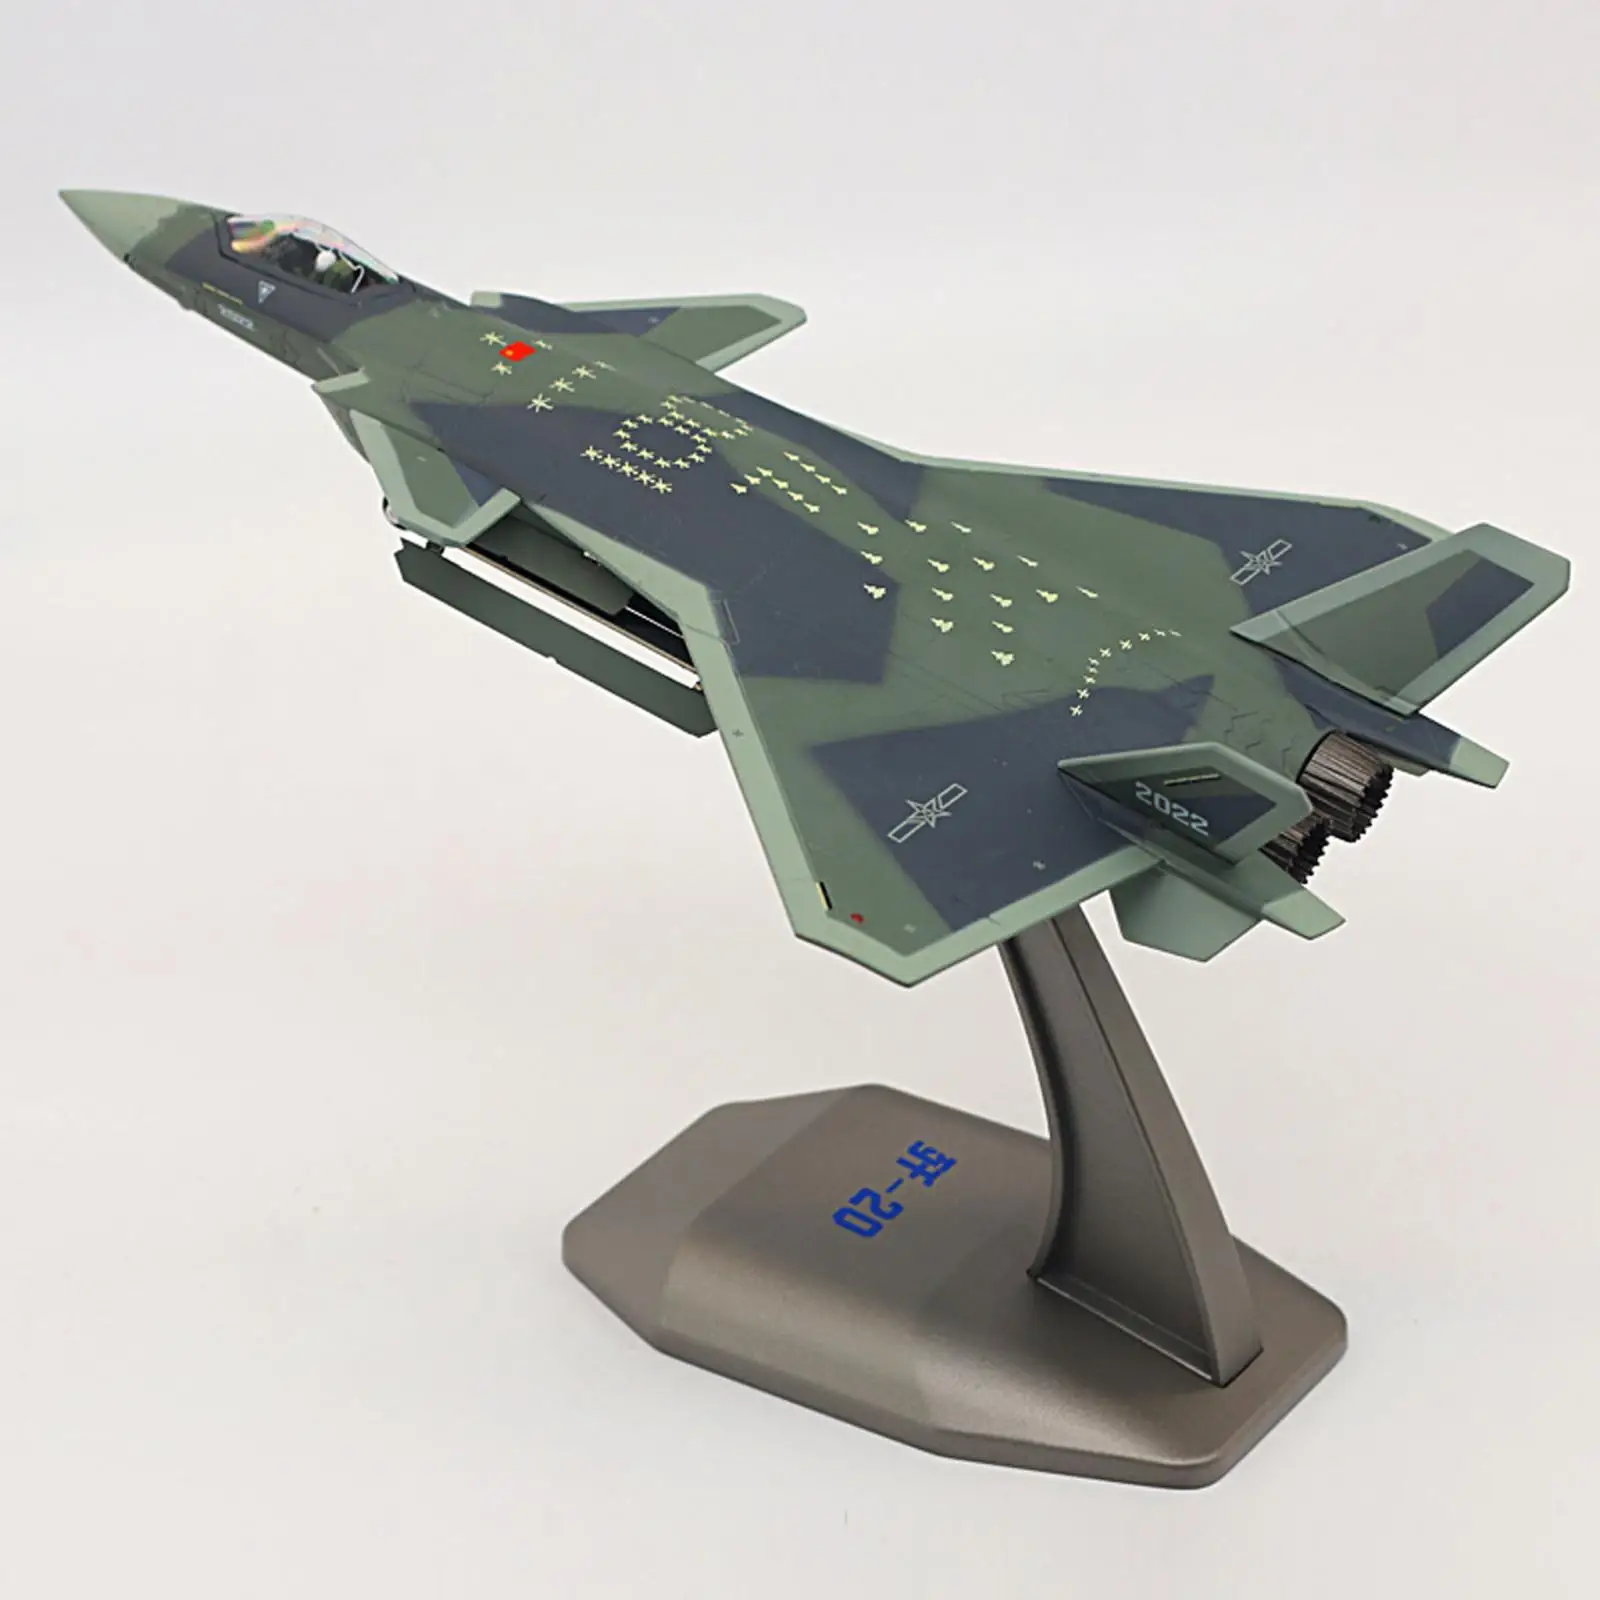 

1/72 Plane Model Showcase Room Decor 1:72 Scale Airplane Model 1/72 Fighter Model for Boys Girls Children Adults Holiday Gifts